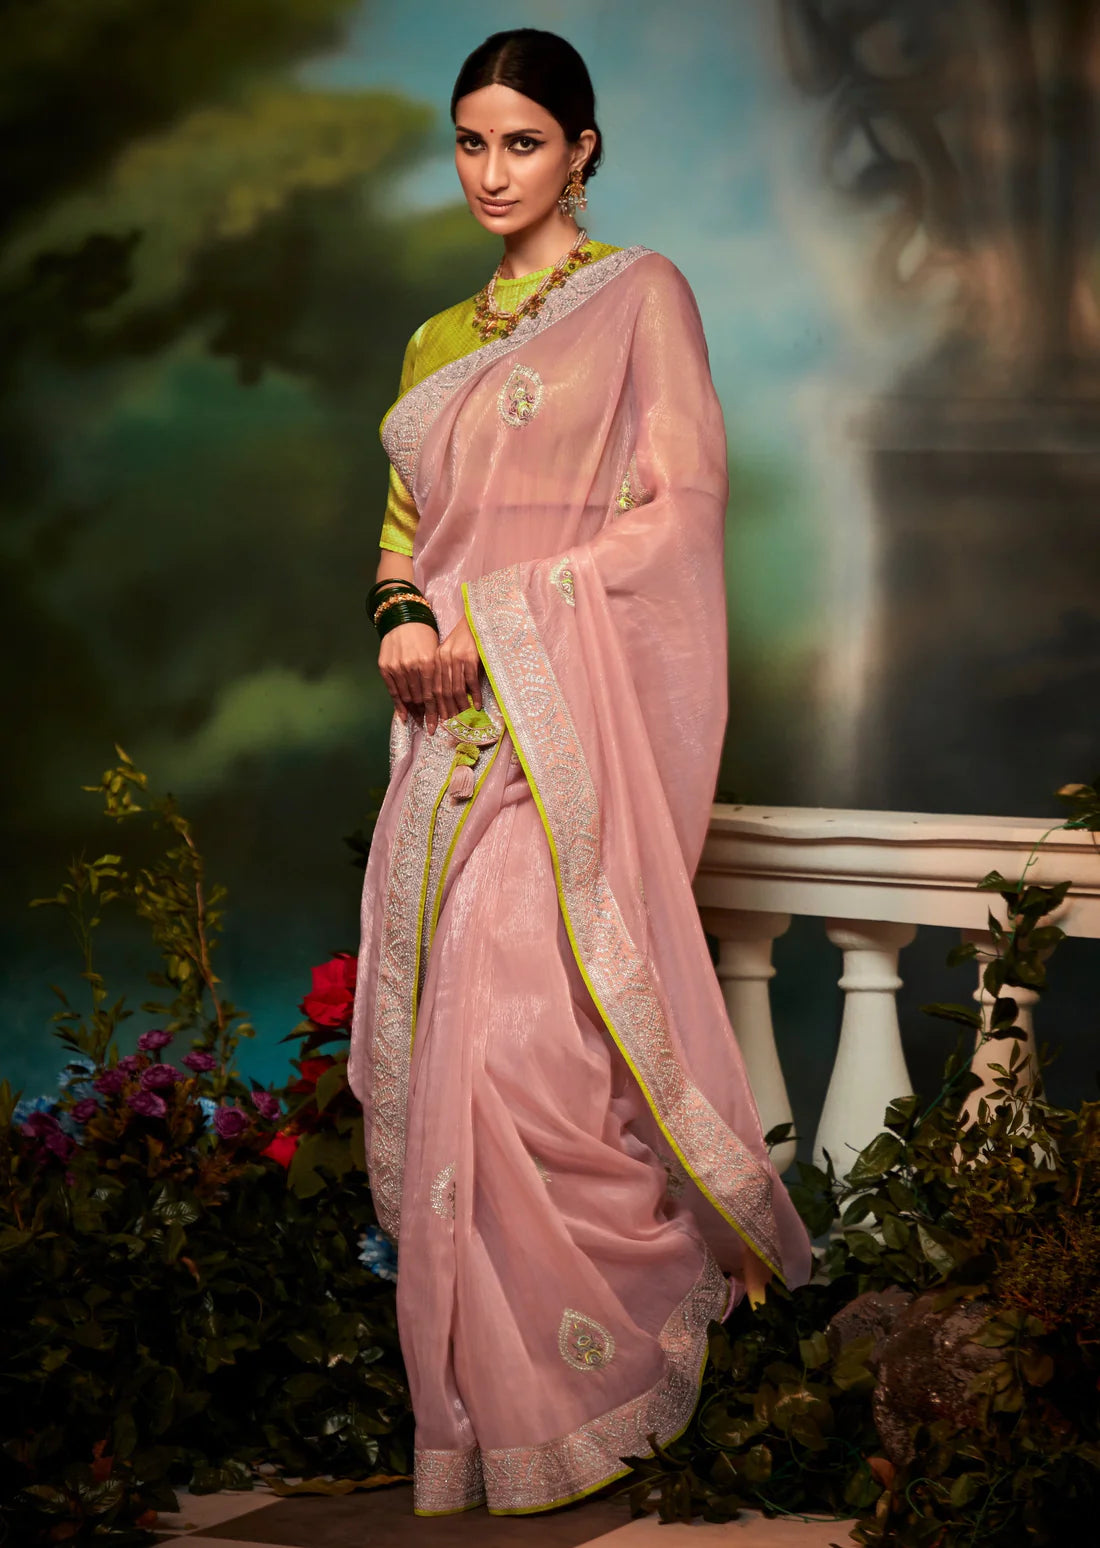 Bride in pink pure organza hand embroidery work saree with yellow blouse.